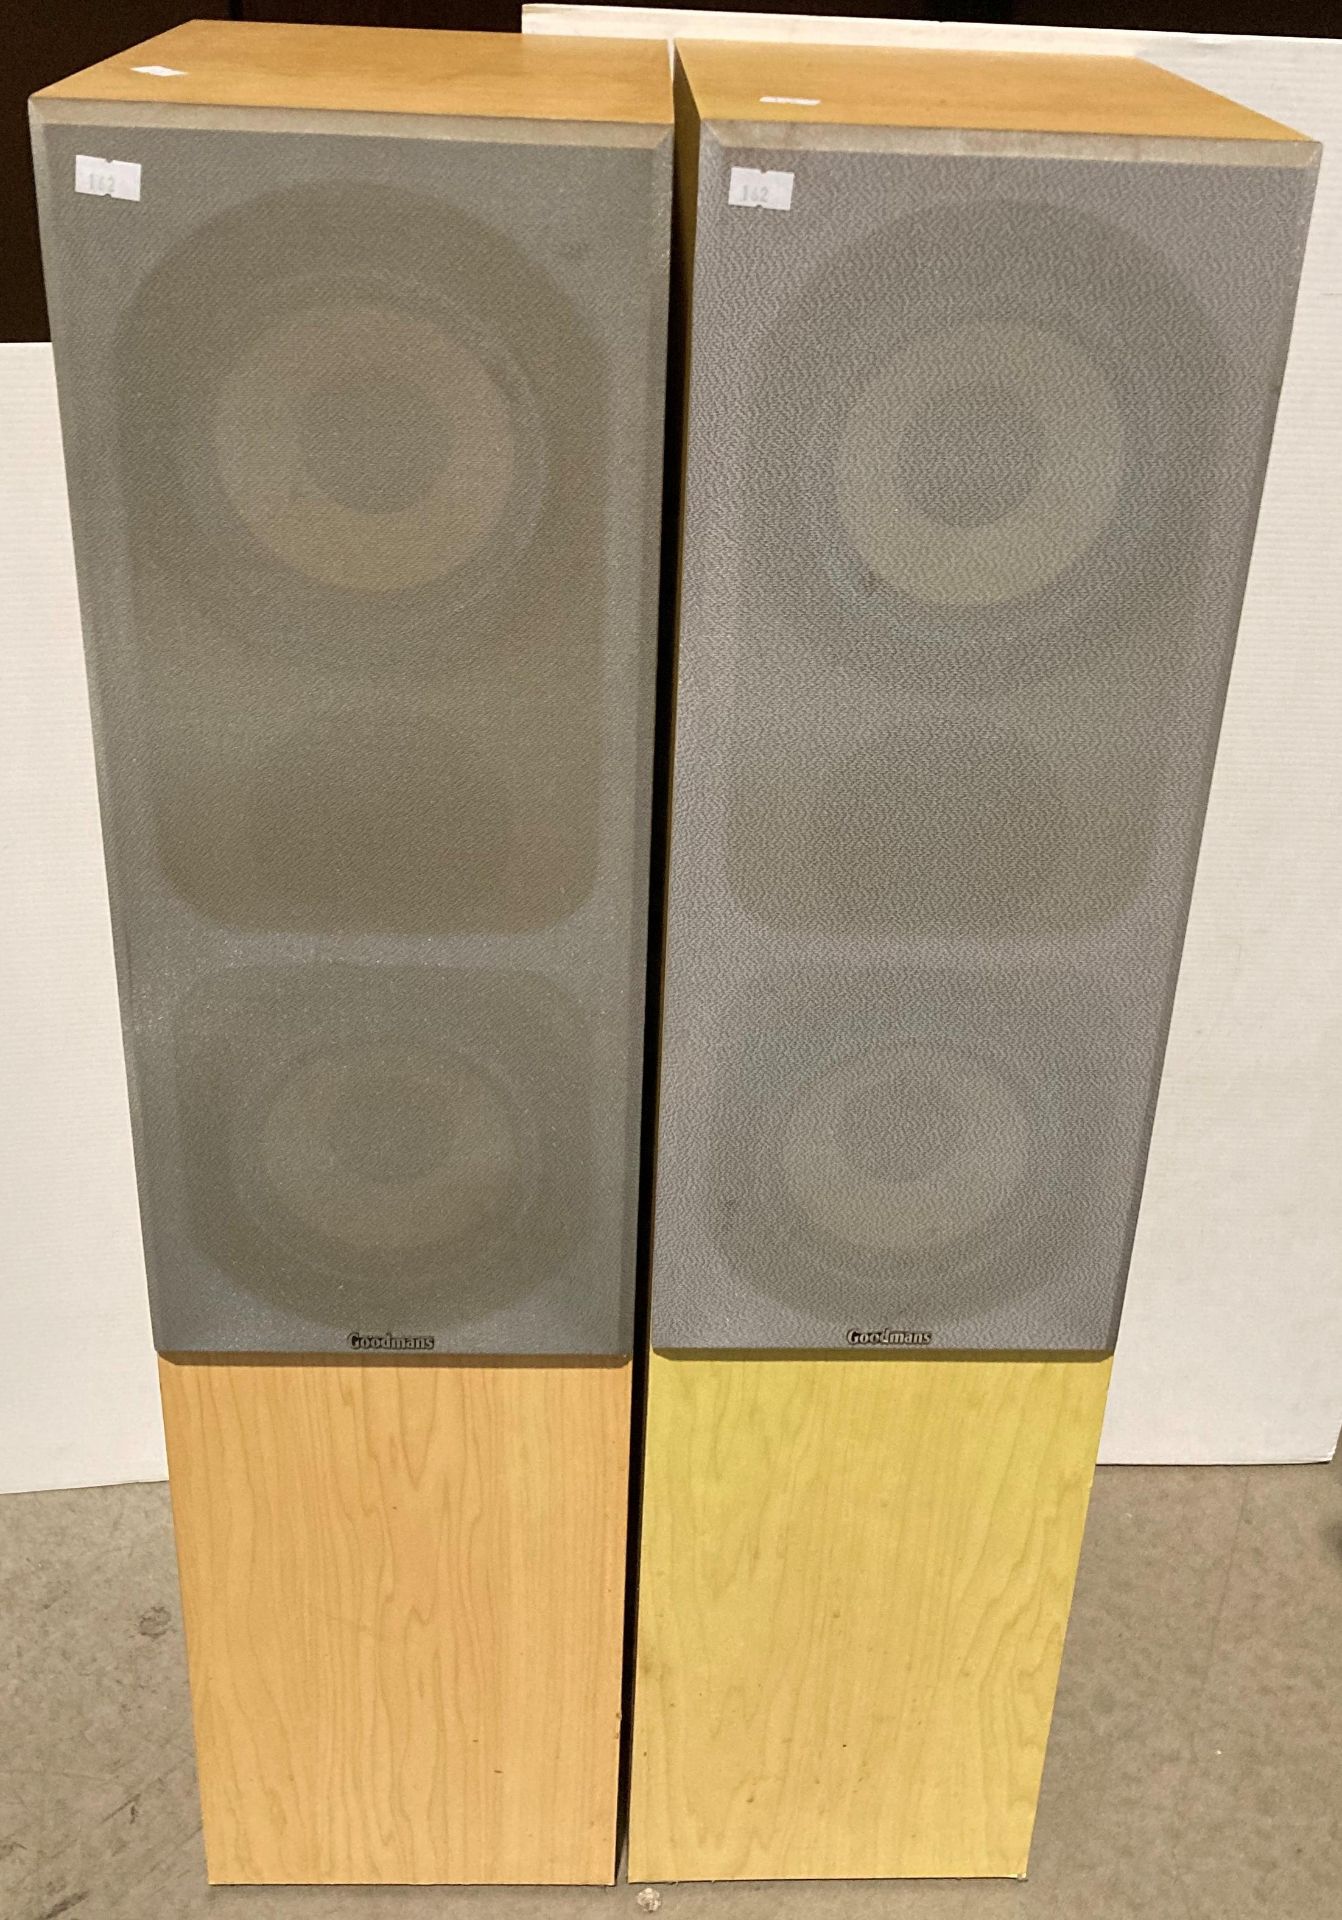 A pair of Goodman's G550 100w home theatre speakers,